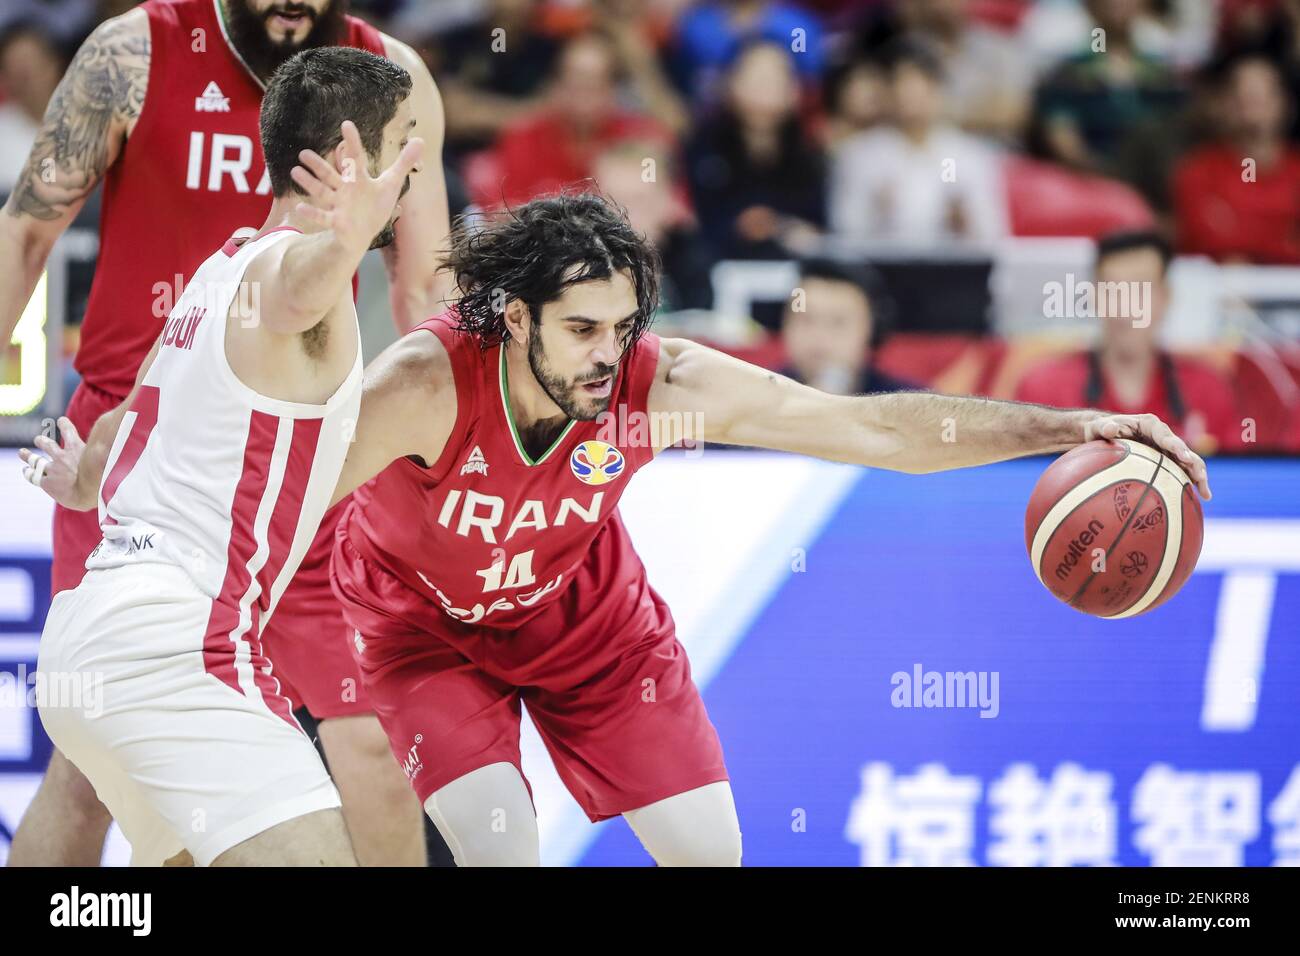 Iranian professional basketball player Samad Bahrami of the Iranian  National Team, right, protects the ball at the second round of Group C 2019  FIBA Basketball World Cup in Guangzhou city, south China's